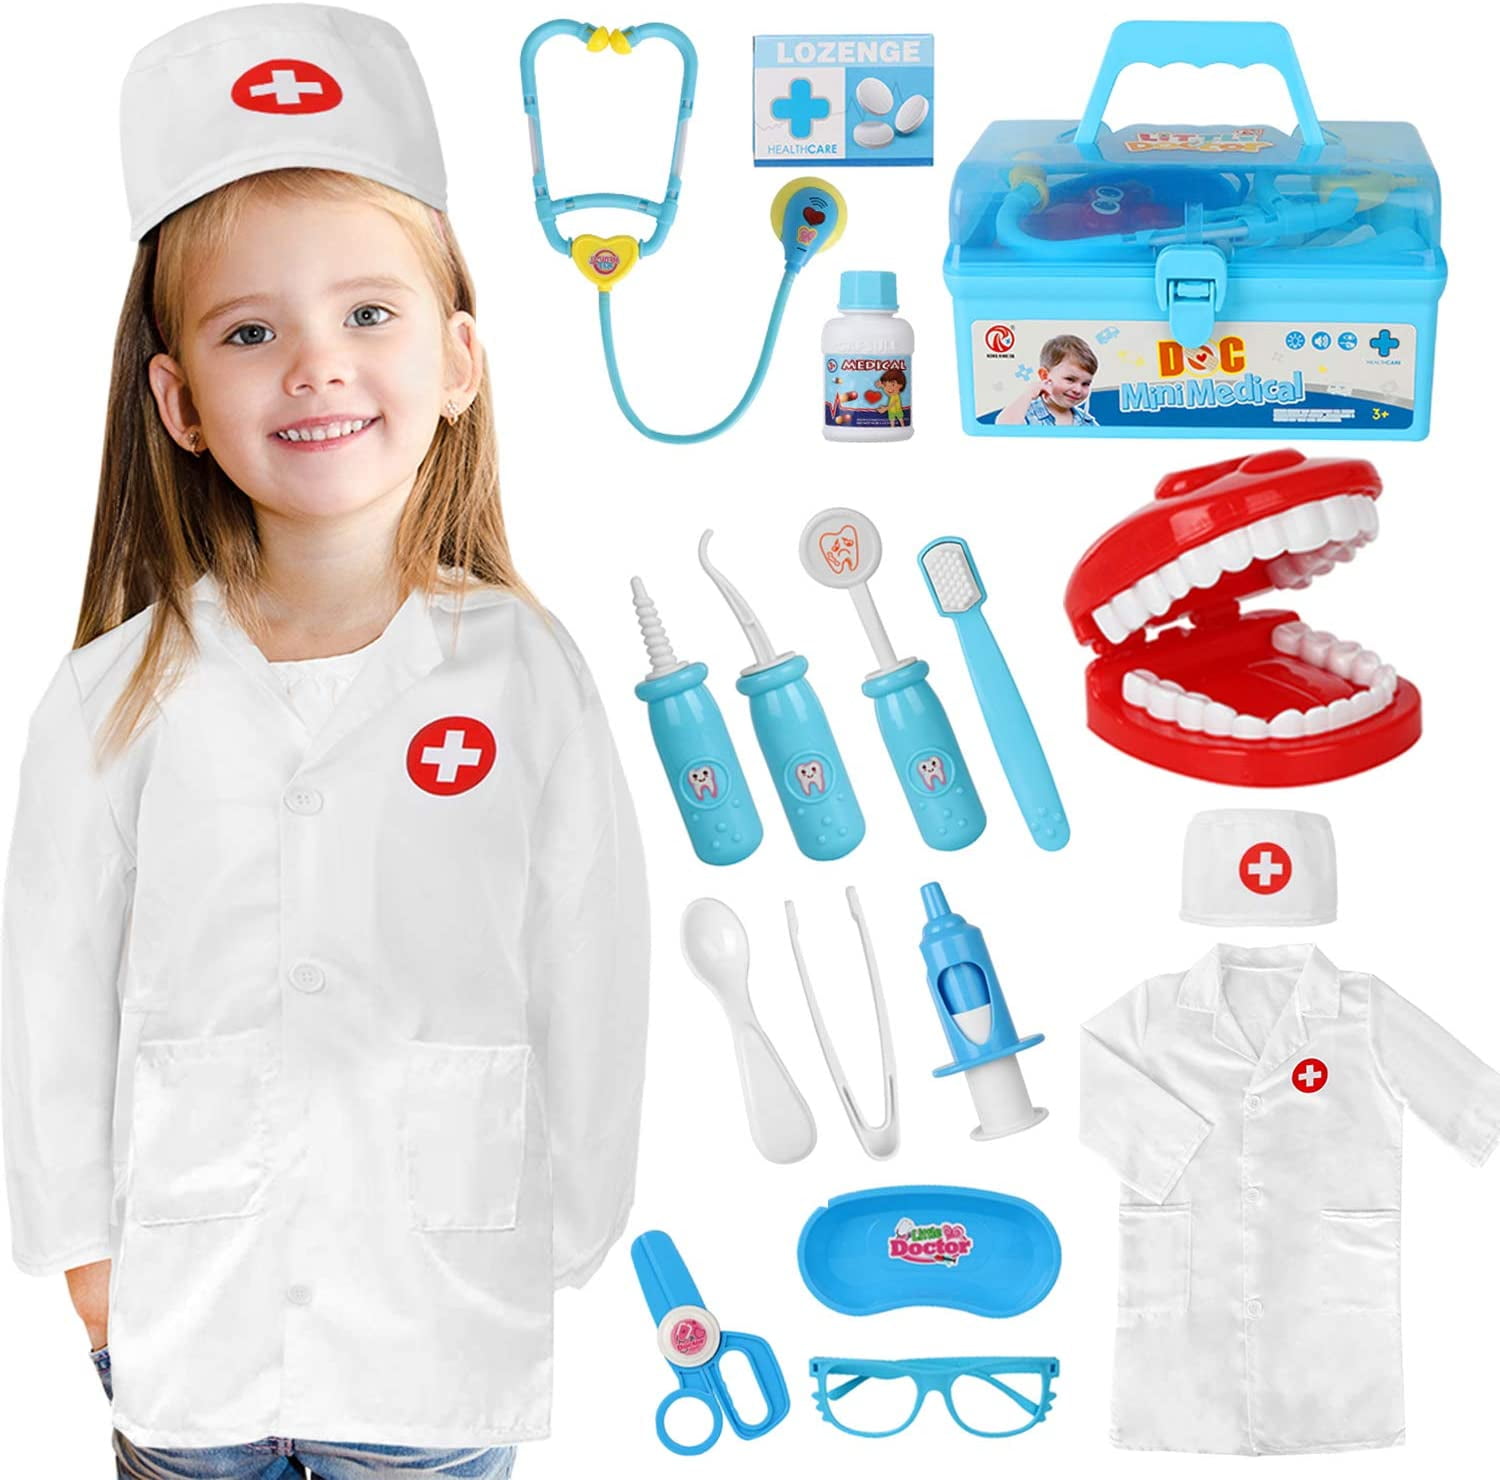 Toddler Pretend Doctor Role Play Accessory Uniform Clothes Hat Learning Toy 